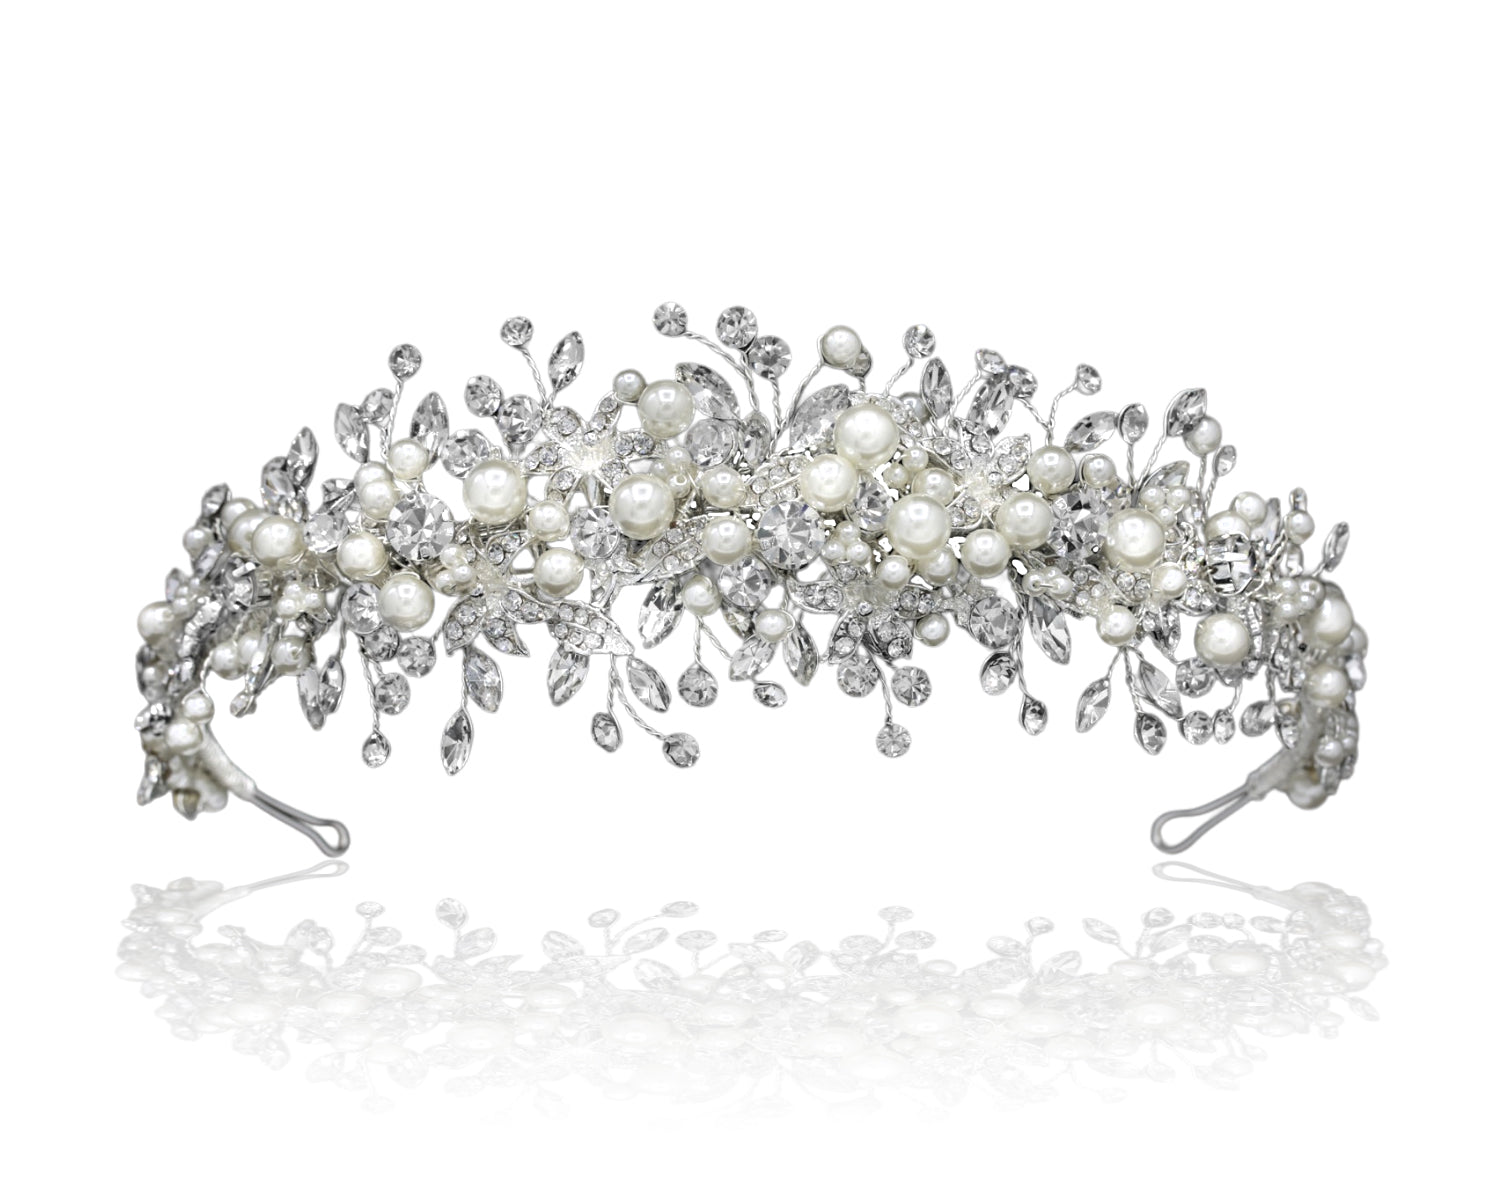 Bright Wedding Headpiece of Crystals and Ivory Pearls